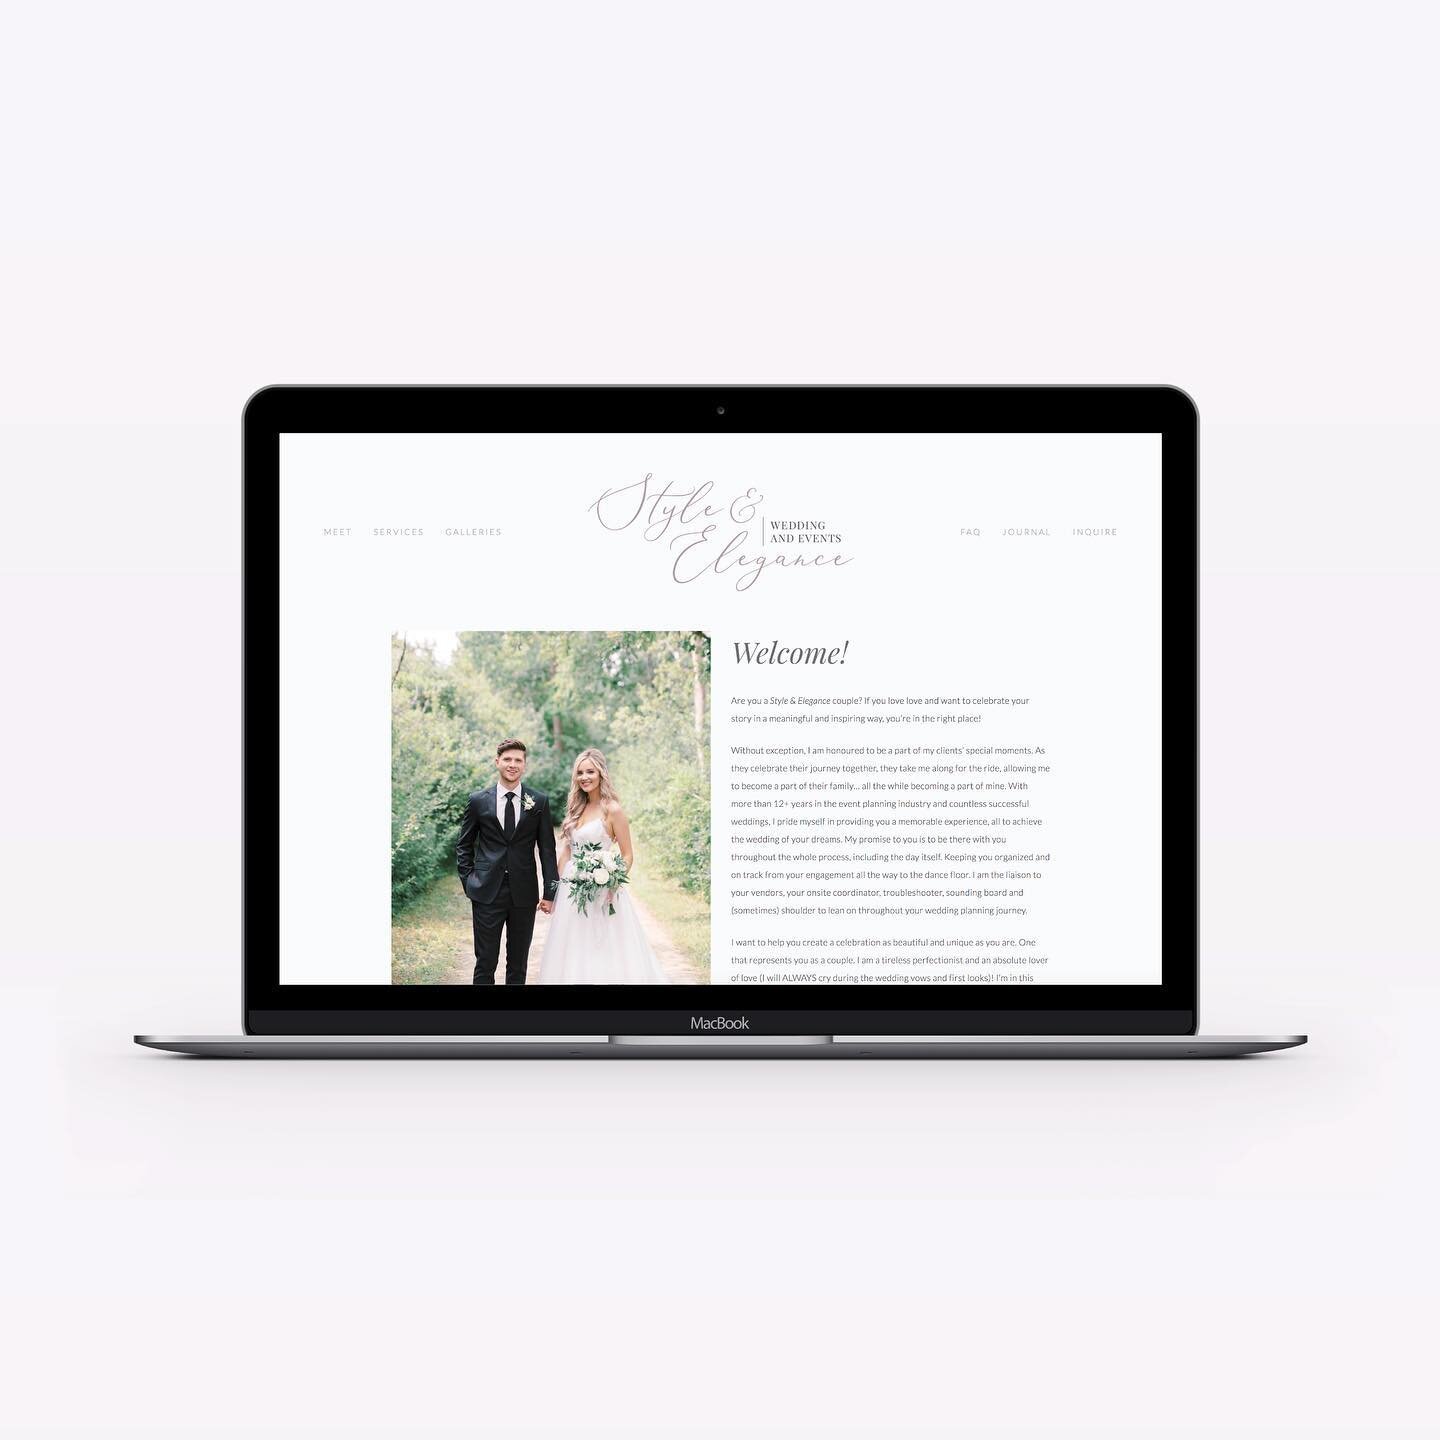 light and airy, with a luxurious note... new website design for @styleand_elegance!